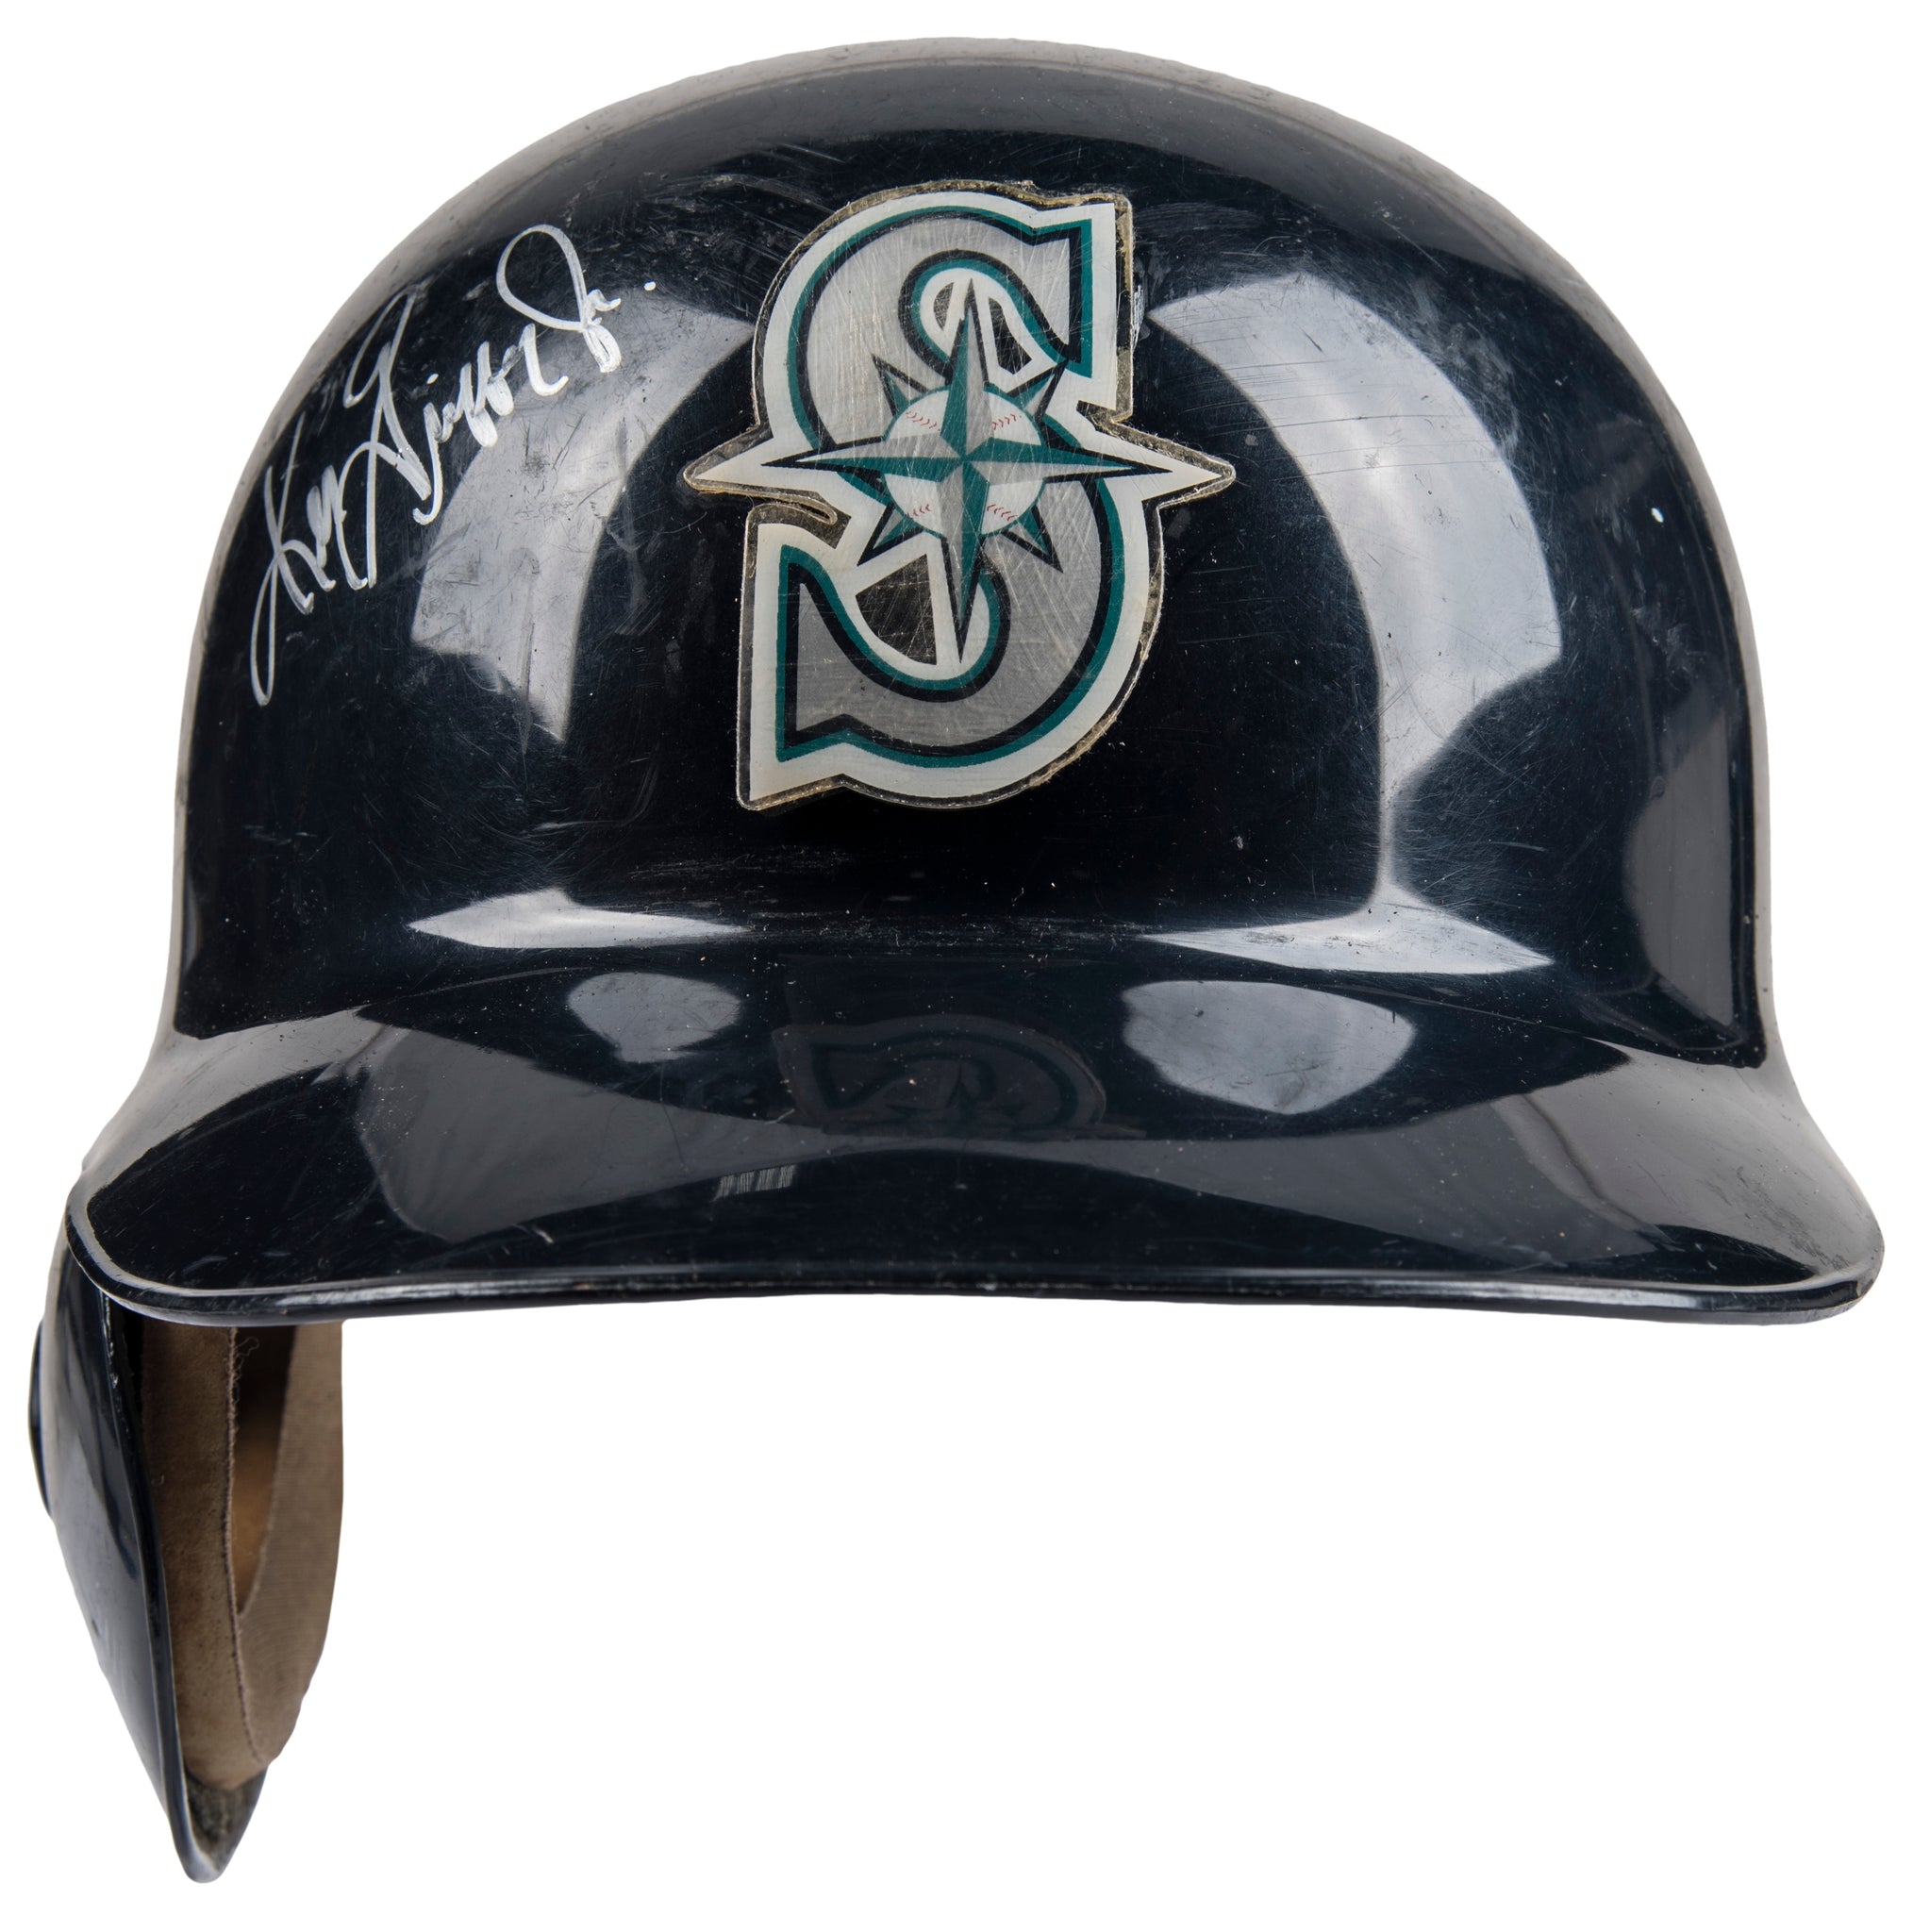 mariners game used